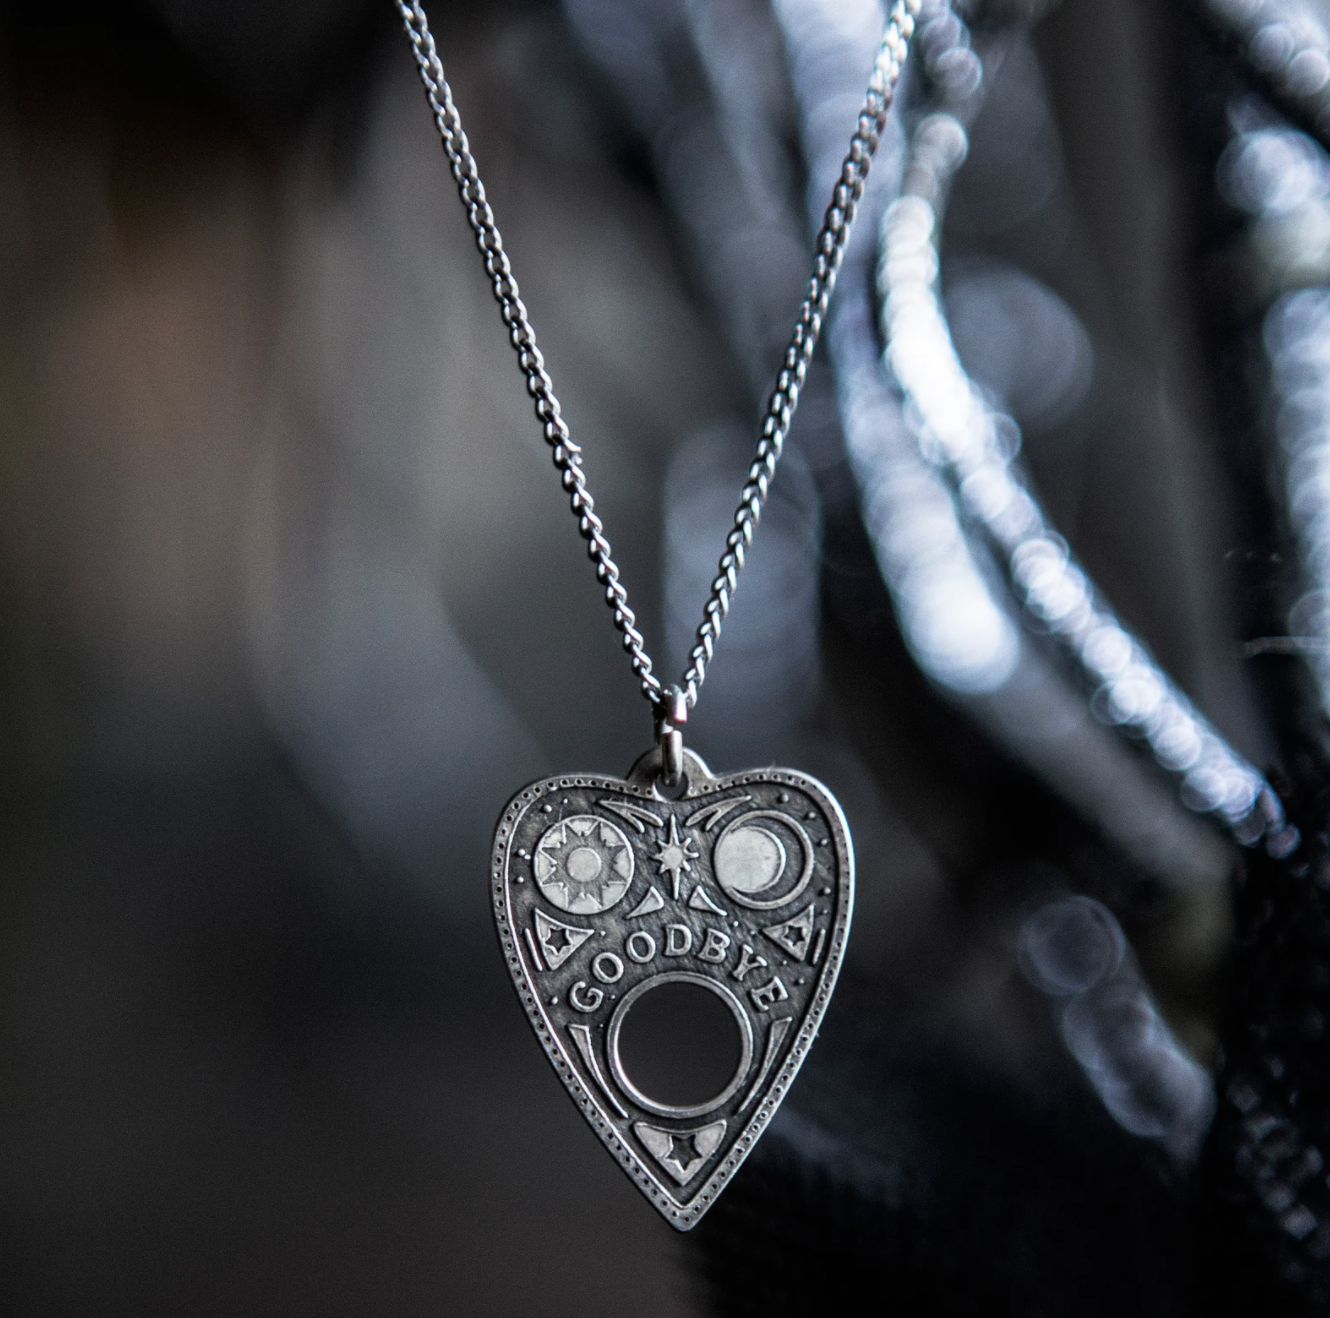 a necklace with a Ouija pendant that says &quot;Goodbye&quot;